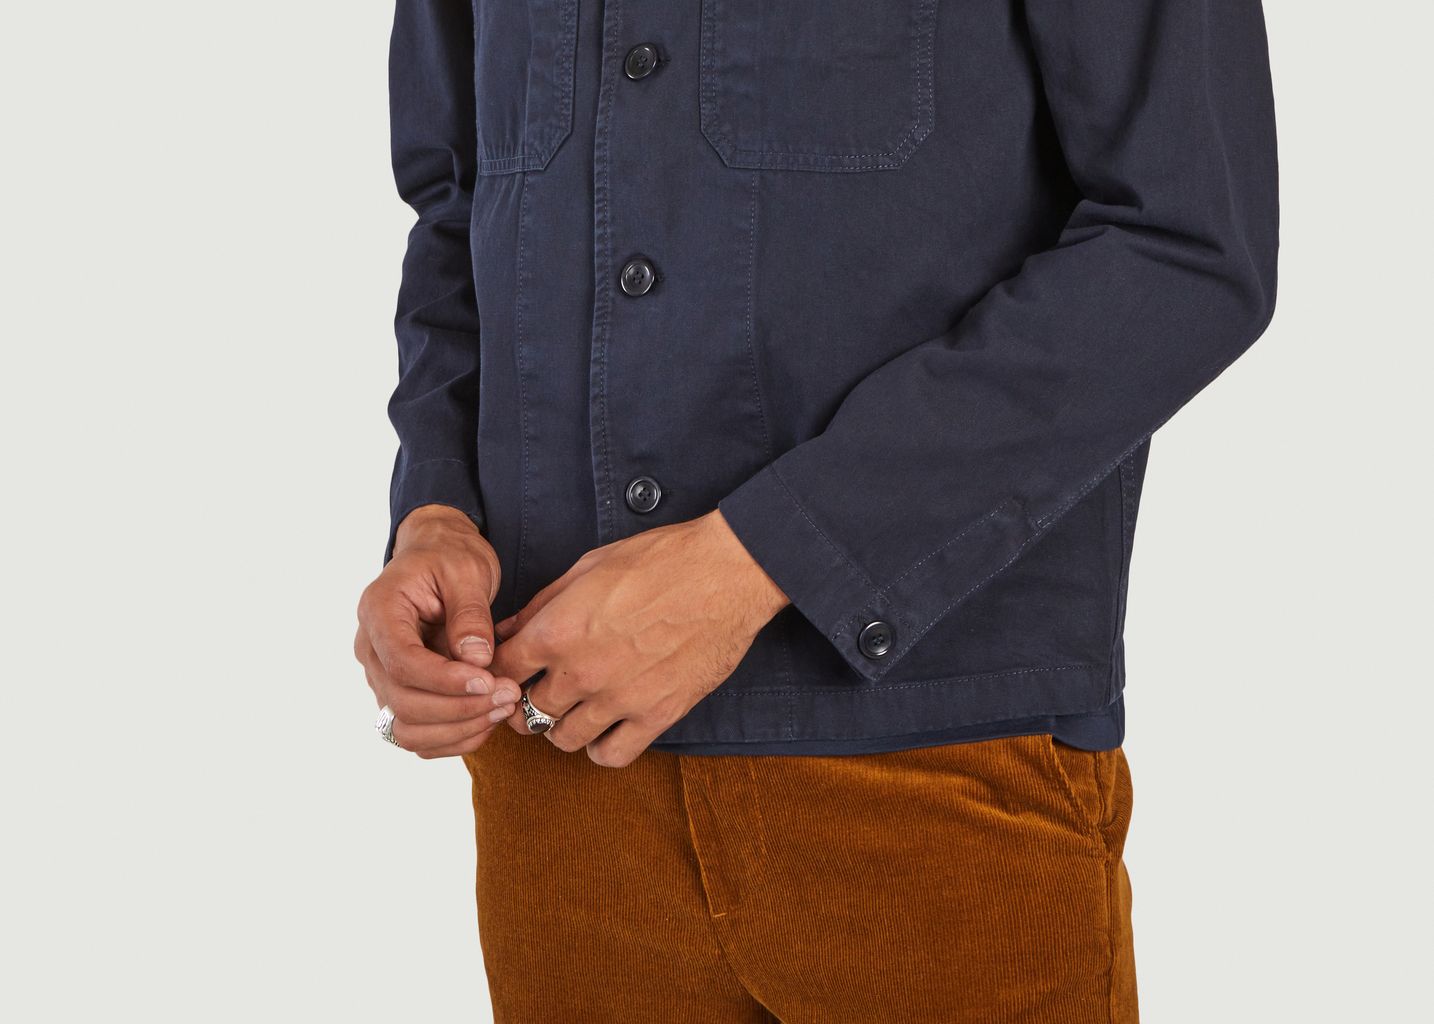 Chemise Tyge Organic Twill  - Norse Projects